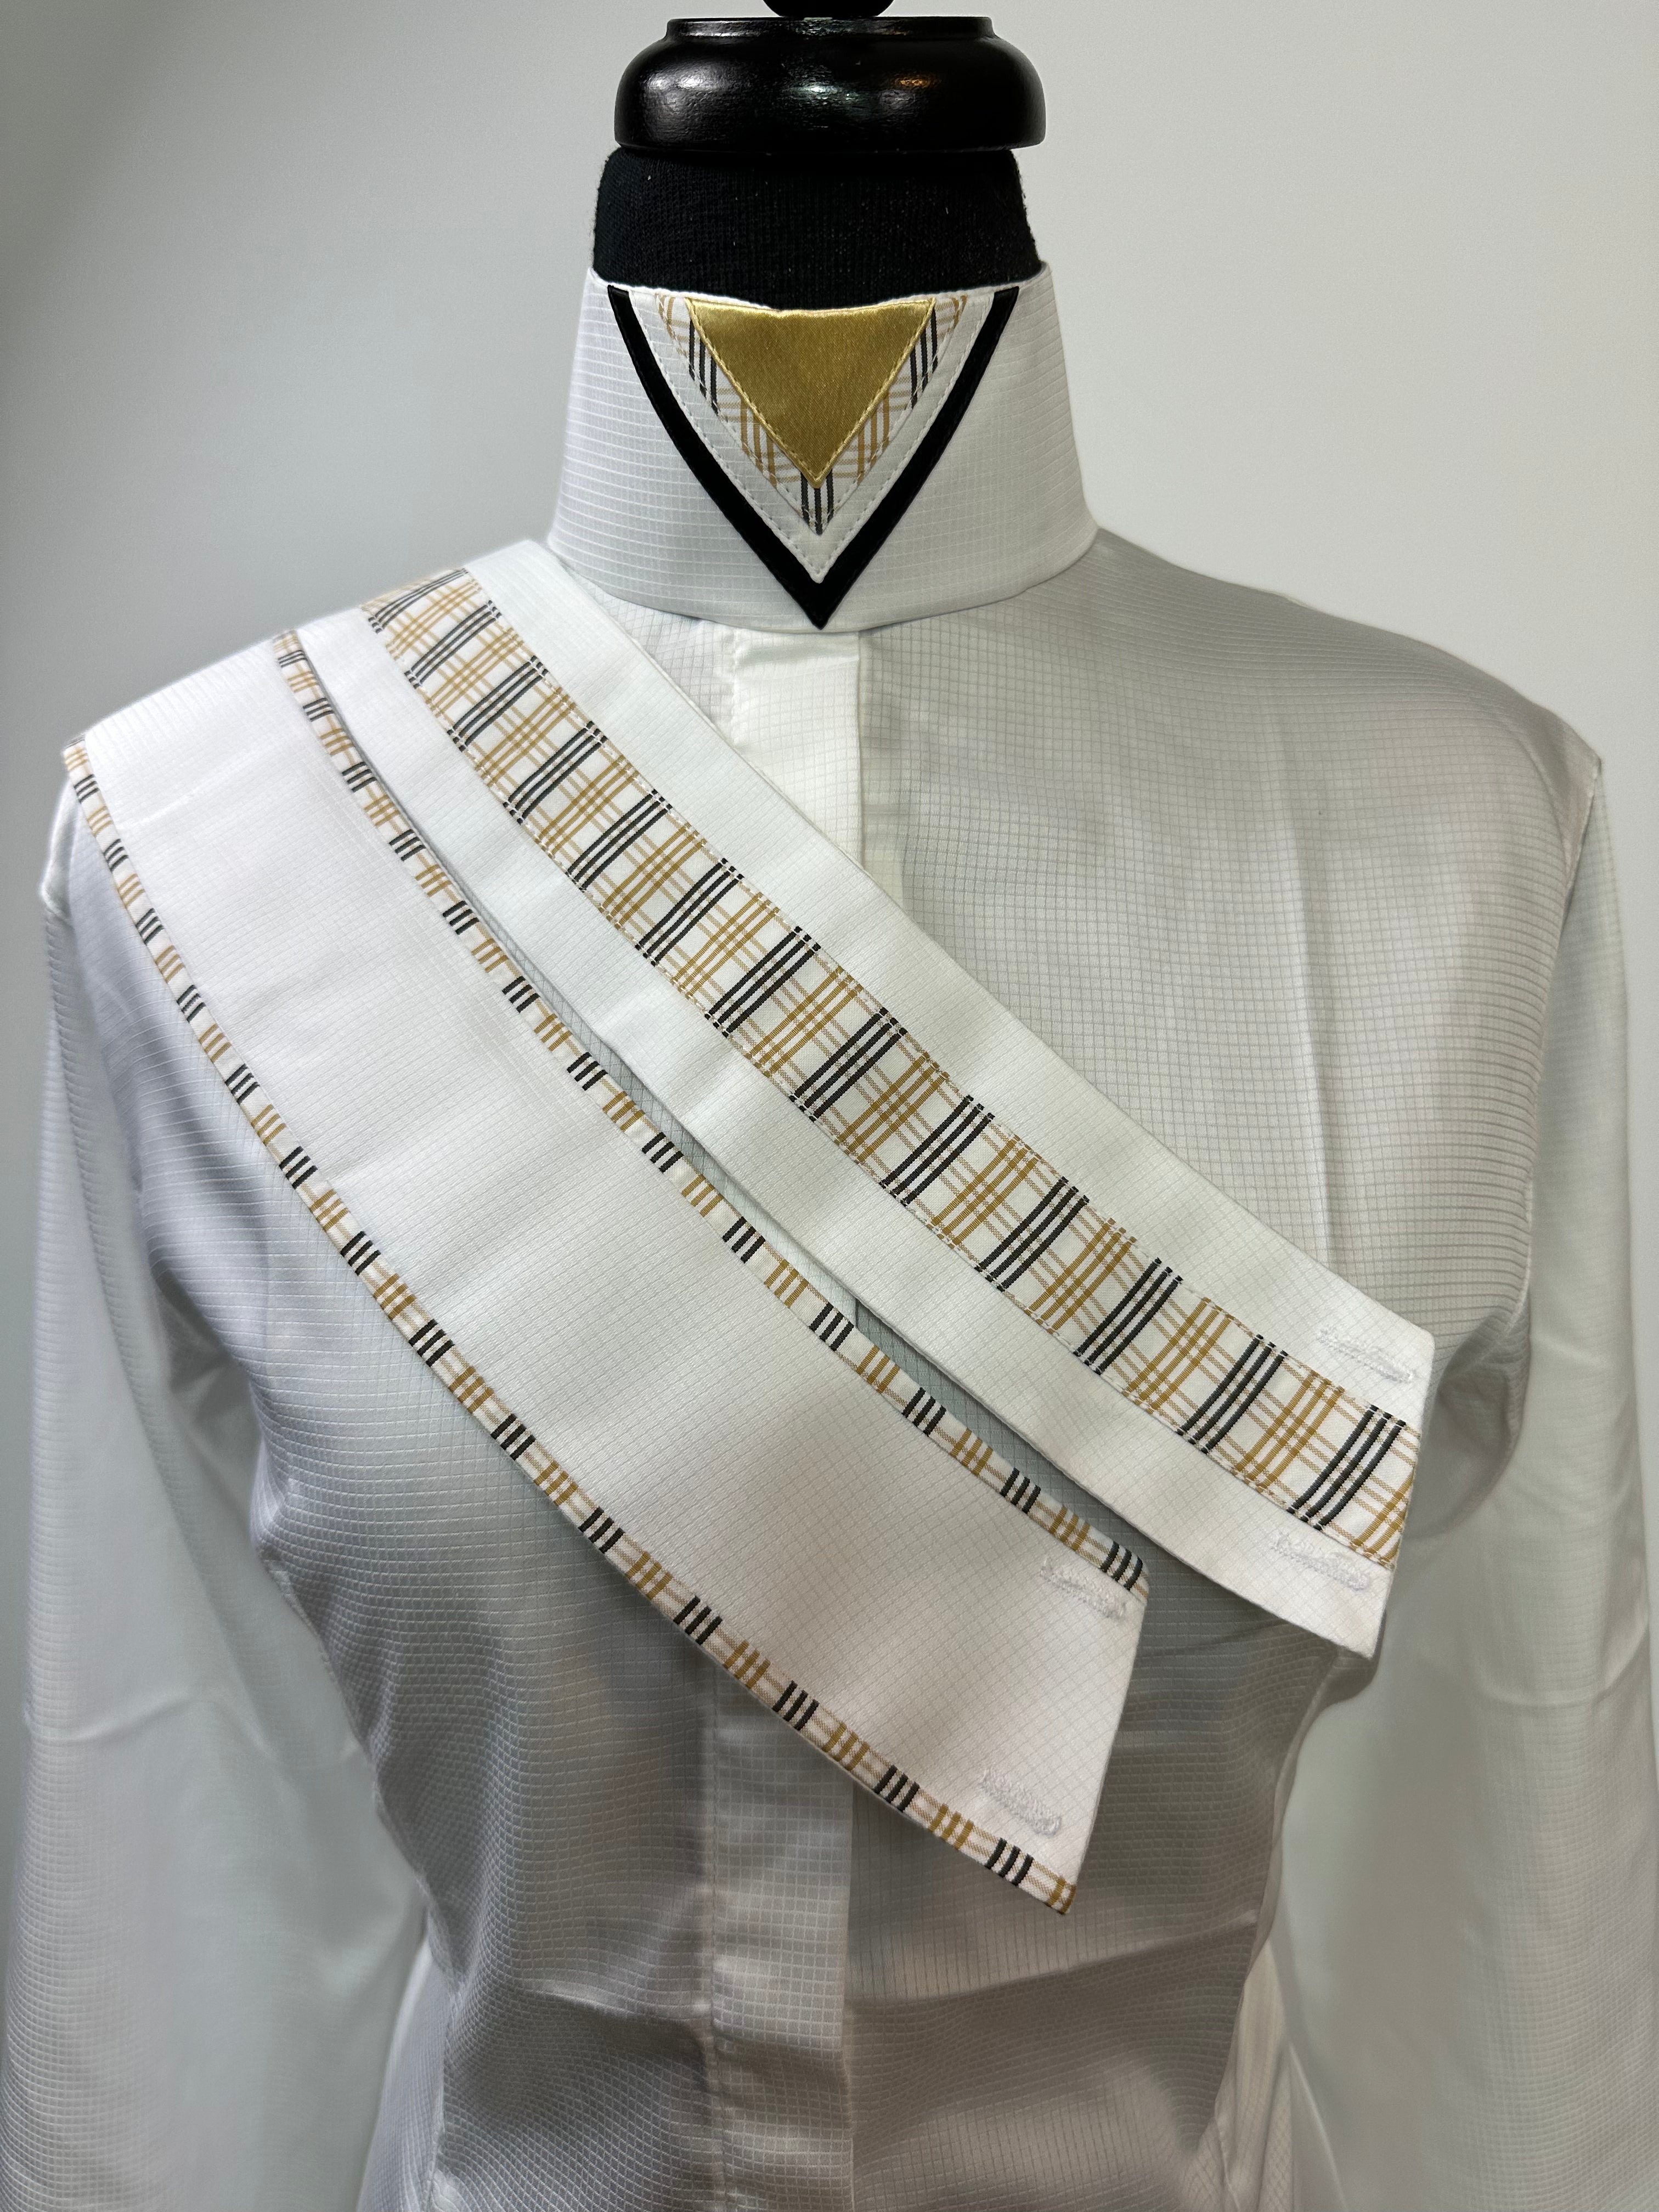 English Show Shirt White with Black and Gold Accents Fabric Code U50